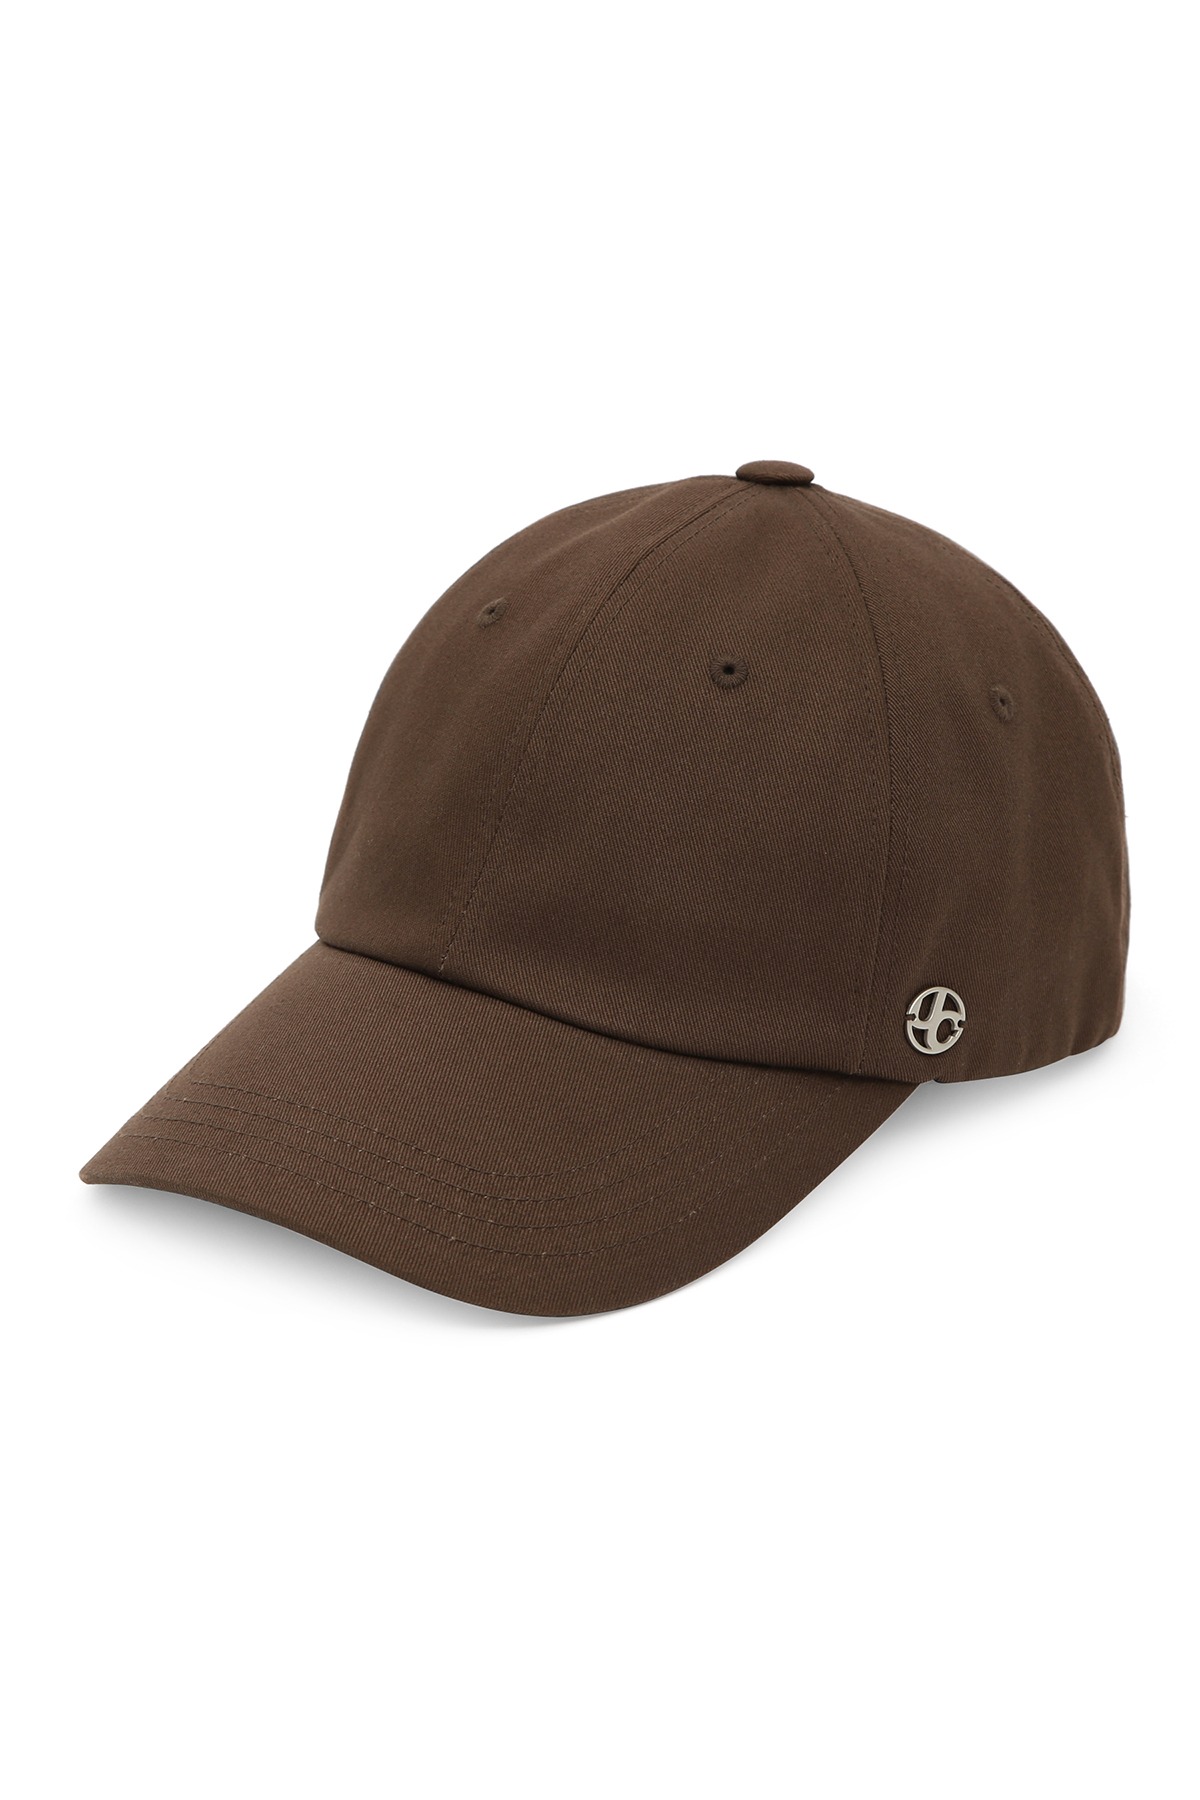 UC / OVER FIT BALL CAP / BR